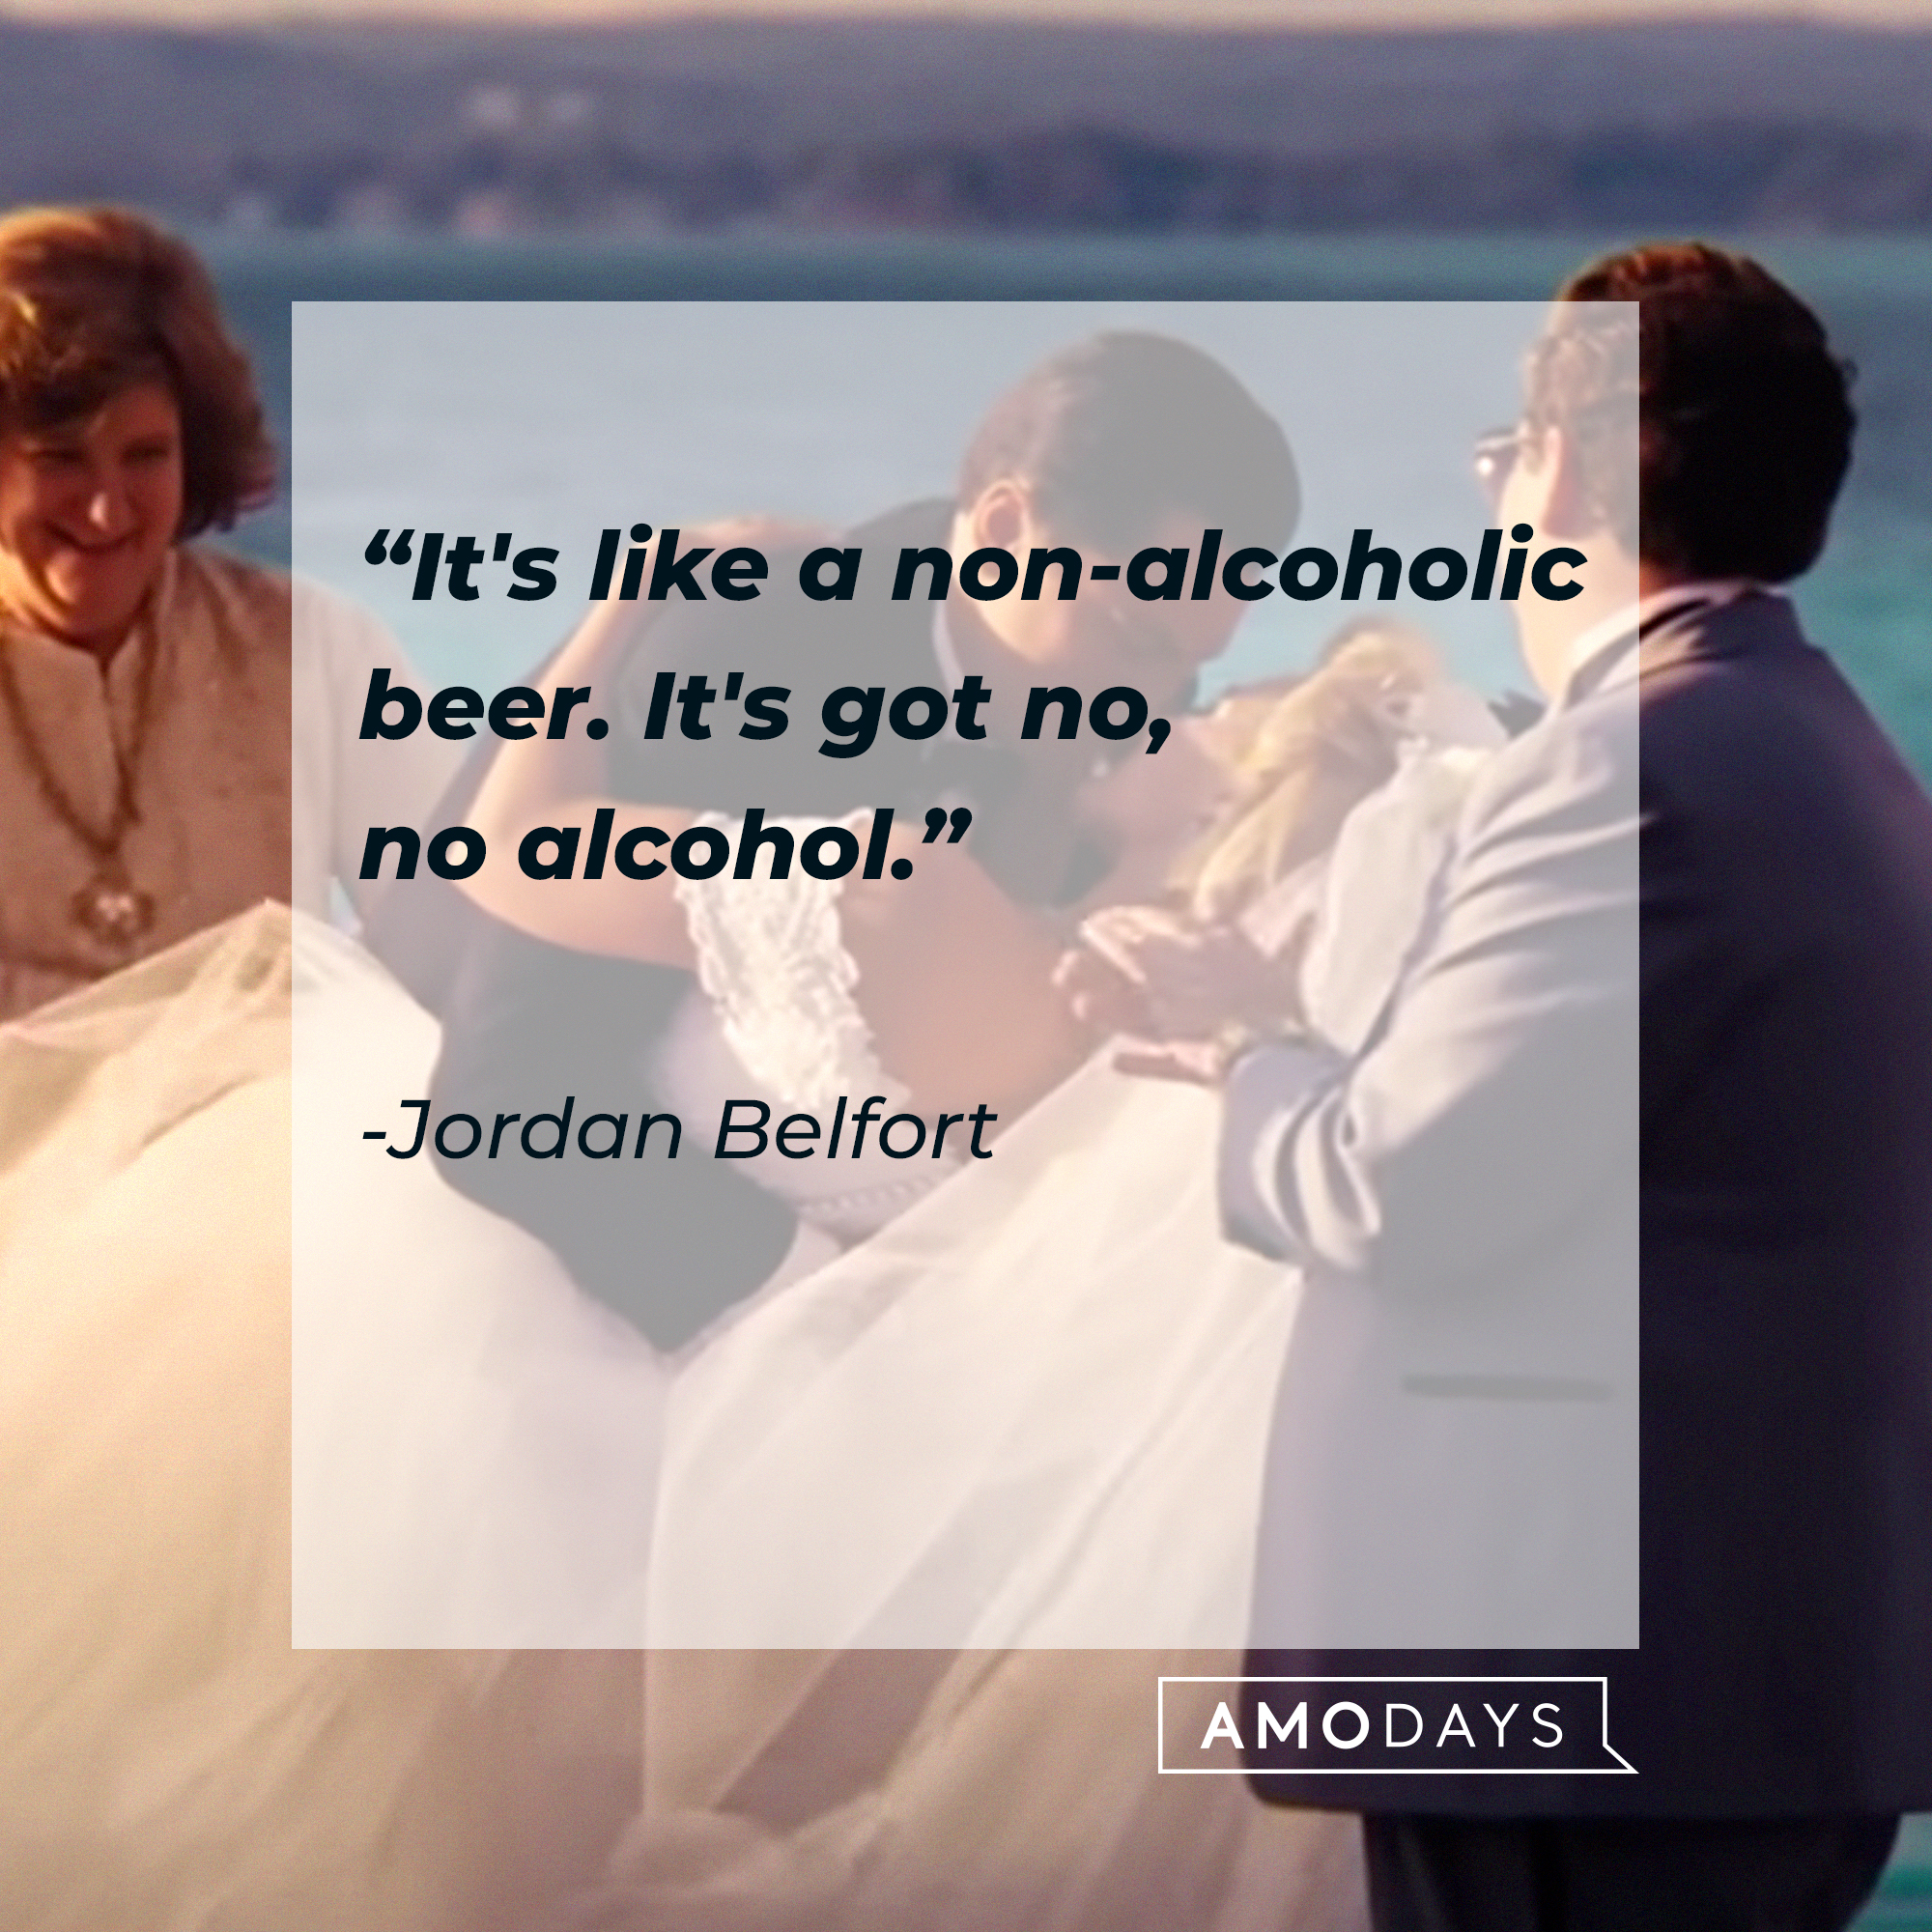 Margot Robbie with Jordan Belfort's quote: "It's like a non-alcoholic beer. It's got no, no alcohol." | Source: Youtube/paramountmovies